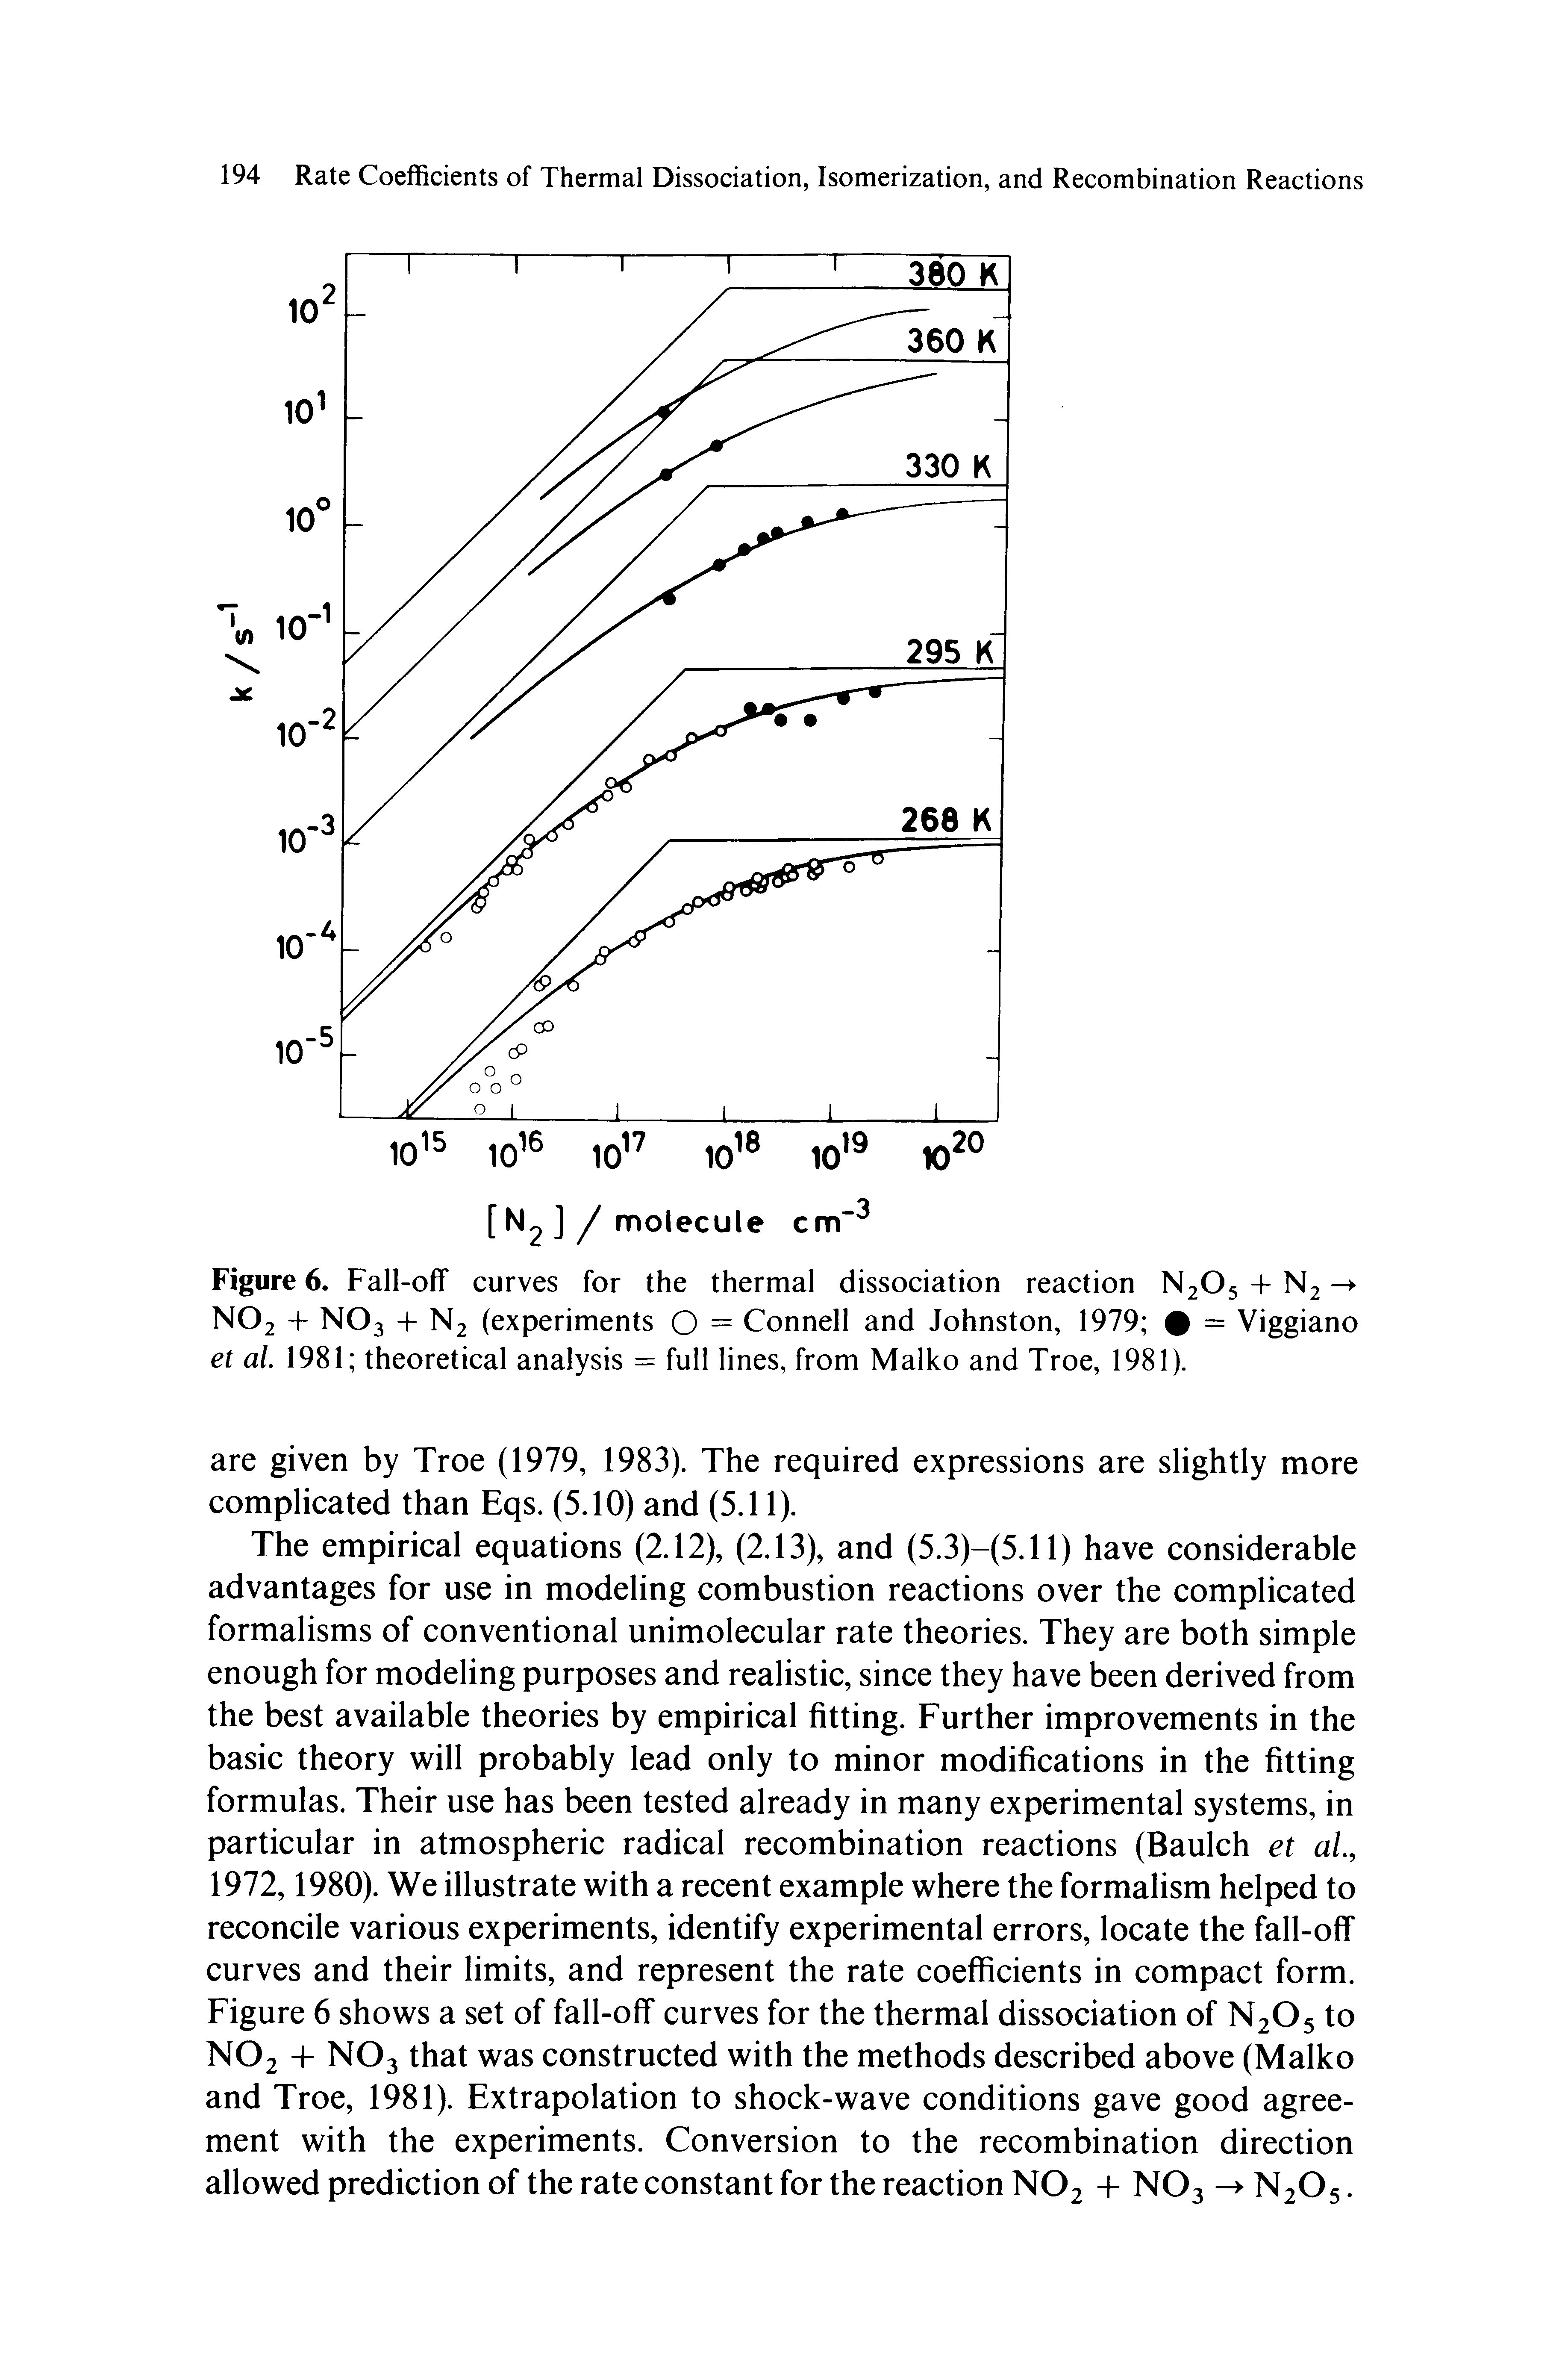 Figure 6. Fall-off curves for the thermal dissociation reaction N2O5 -h N2 - NO2 + NO3 + N2 (experiments O = Connell and Johnston, 1979 = Viggiano et al. 1981 theoretical analysis = full lines, from Malko and Troe, 1981).